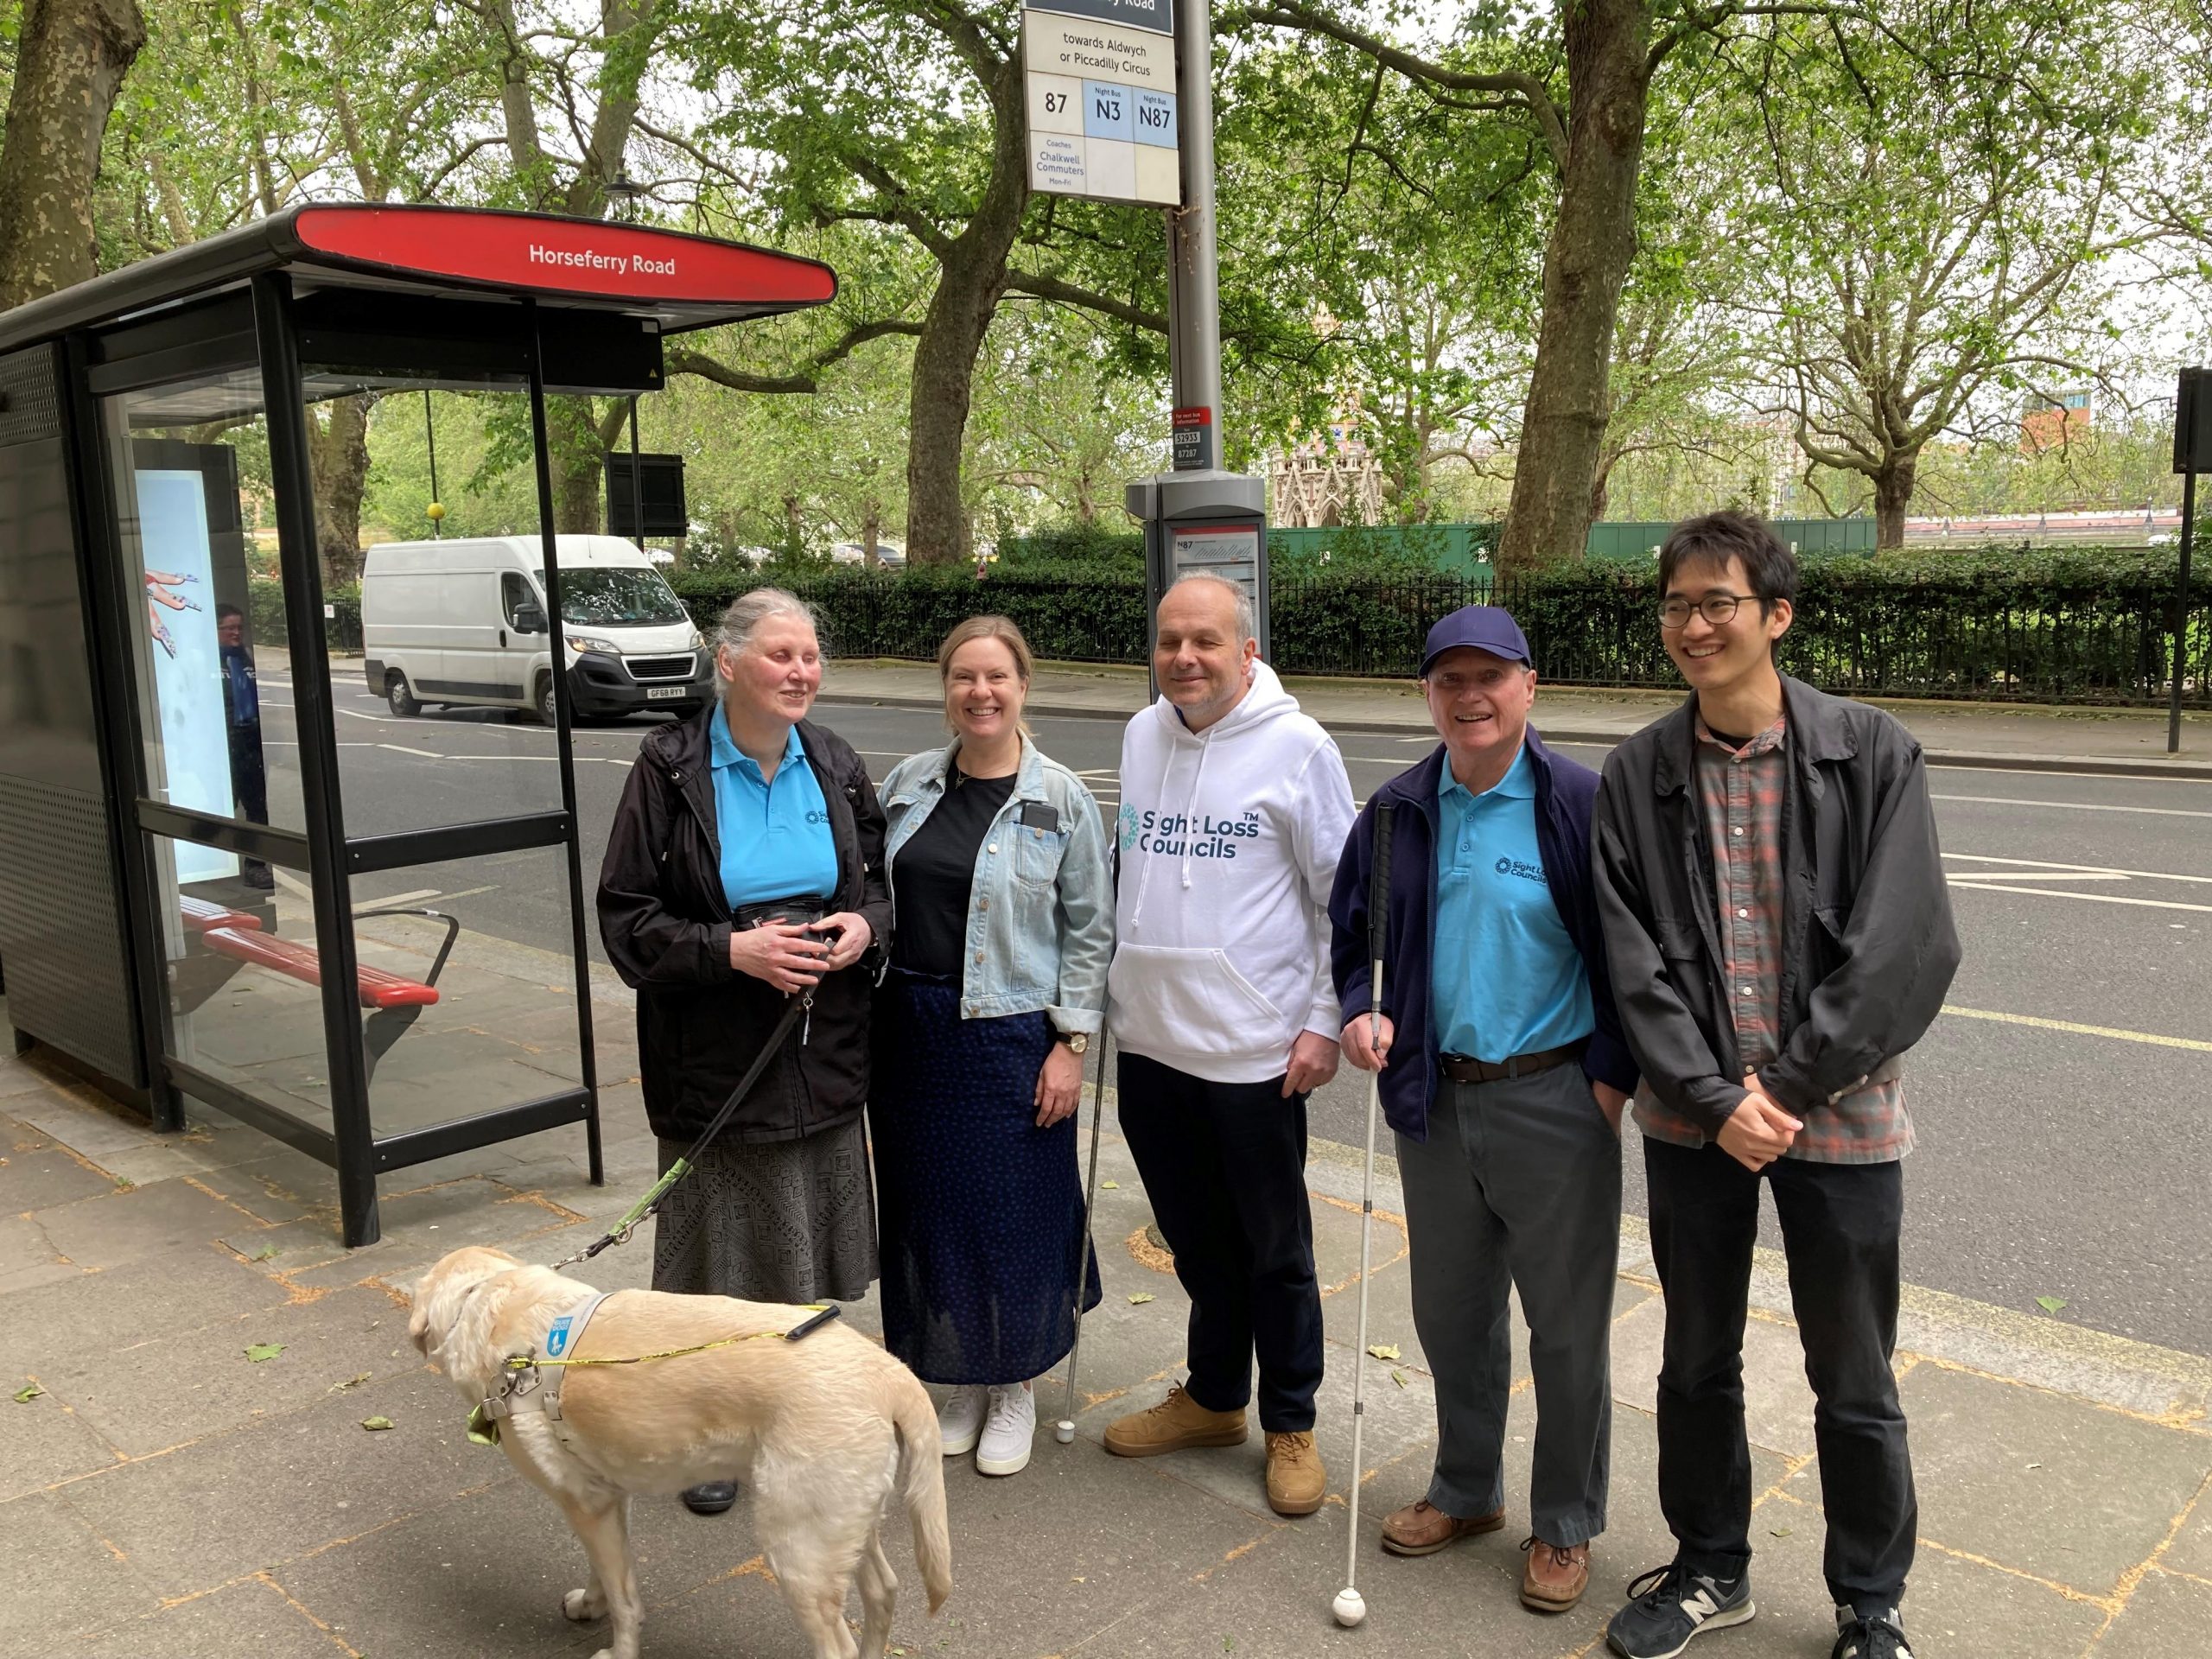 SLC members Mary Cox and Harry Meade, with SLC coordinator Liam O’ Carroll, Hazel Spresser, Customer Experience Manager, TfL, and Benjamin Man, Engagement Officer, TfL. They are stood together next to a bus stop.